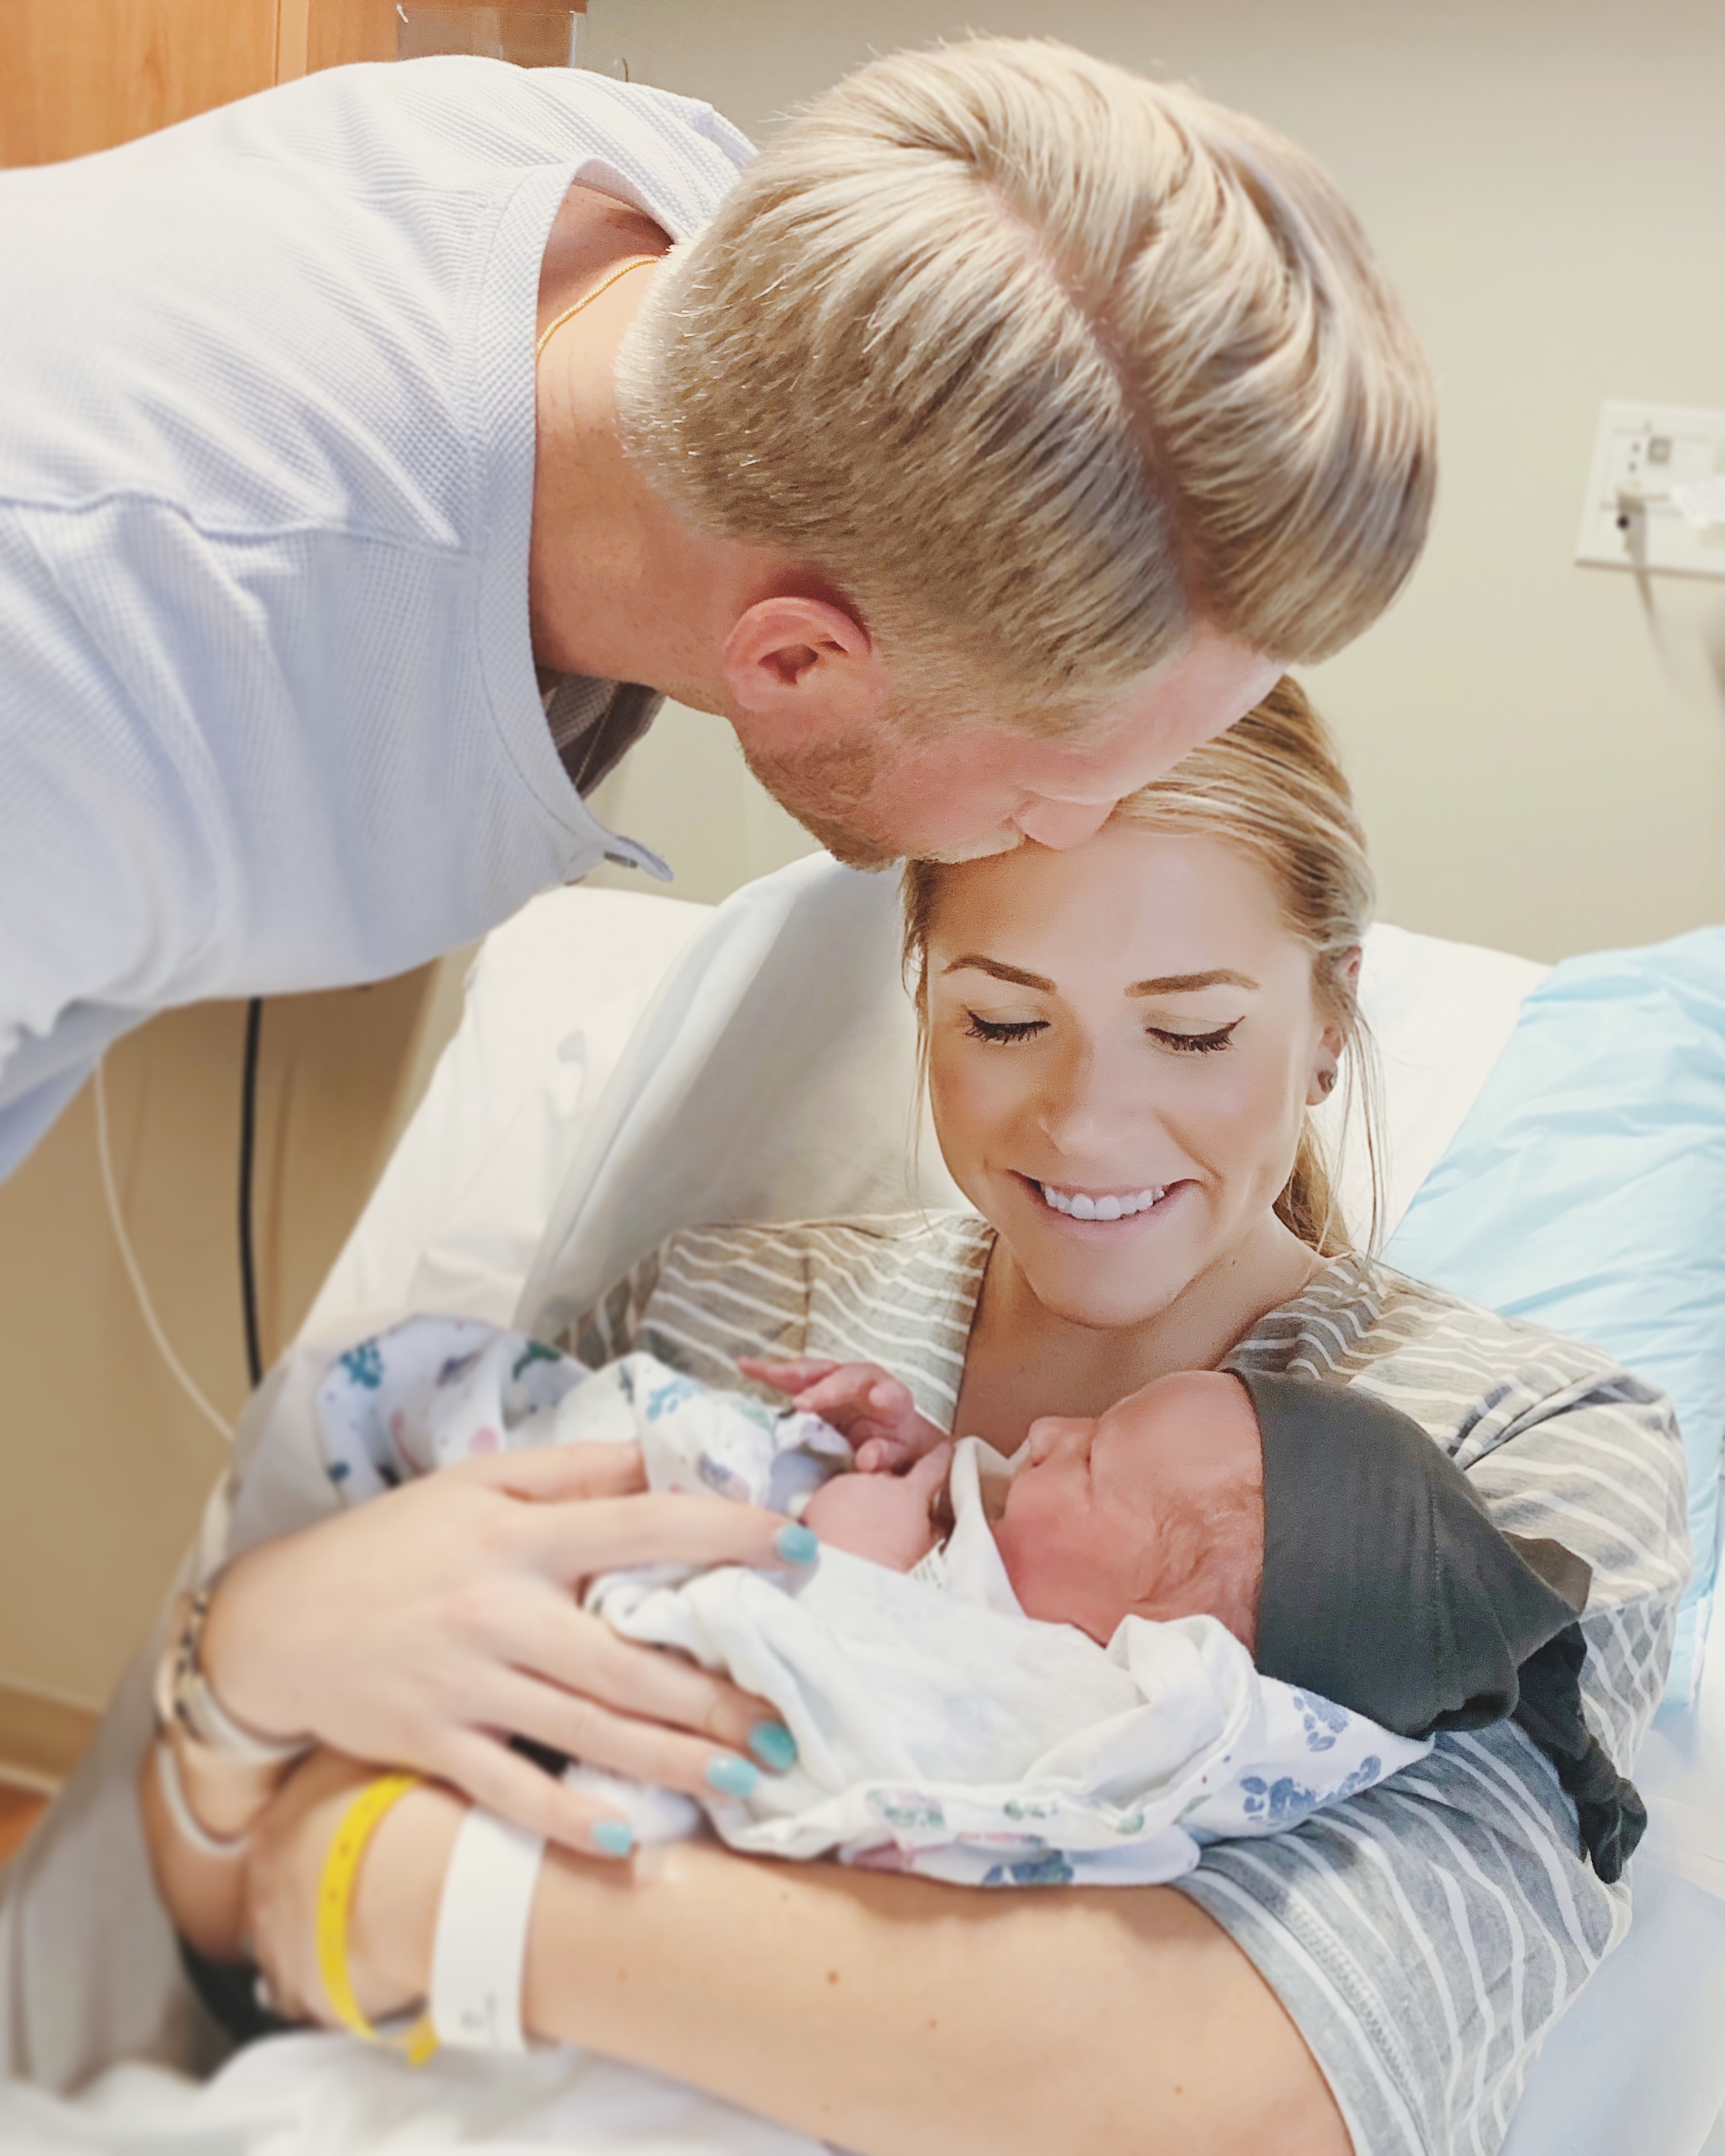 Mallory-Ming-Ennis-blogger-owens-baby-birth-story-featured